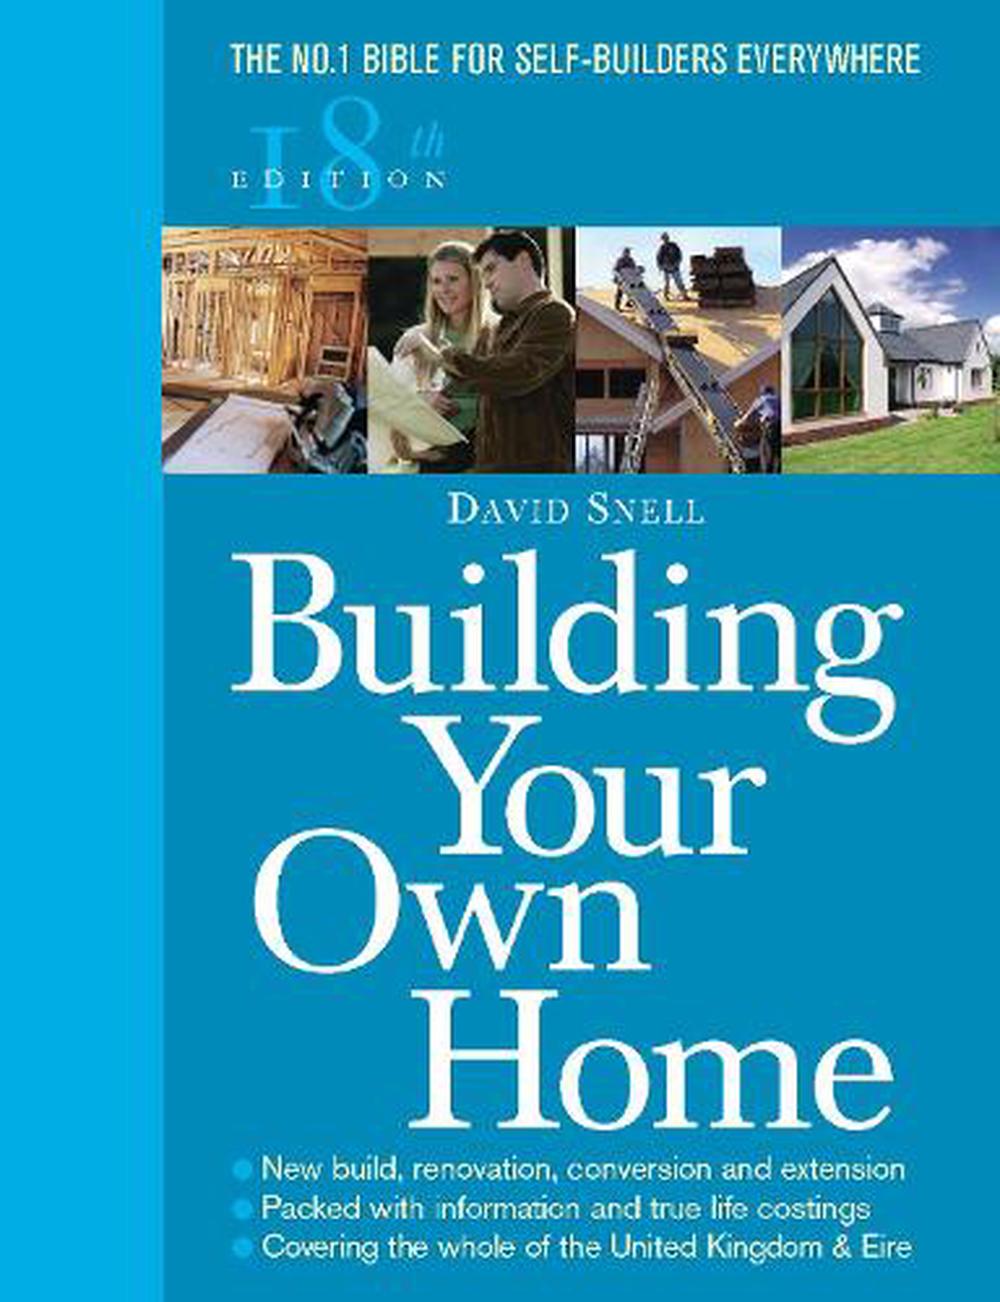 The　at　9780091910839　David　online　Nile　Paperback,　Snell,　by　Home　Edition　18th　Own　Your　Building　Buy